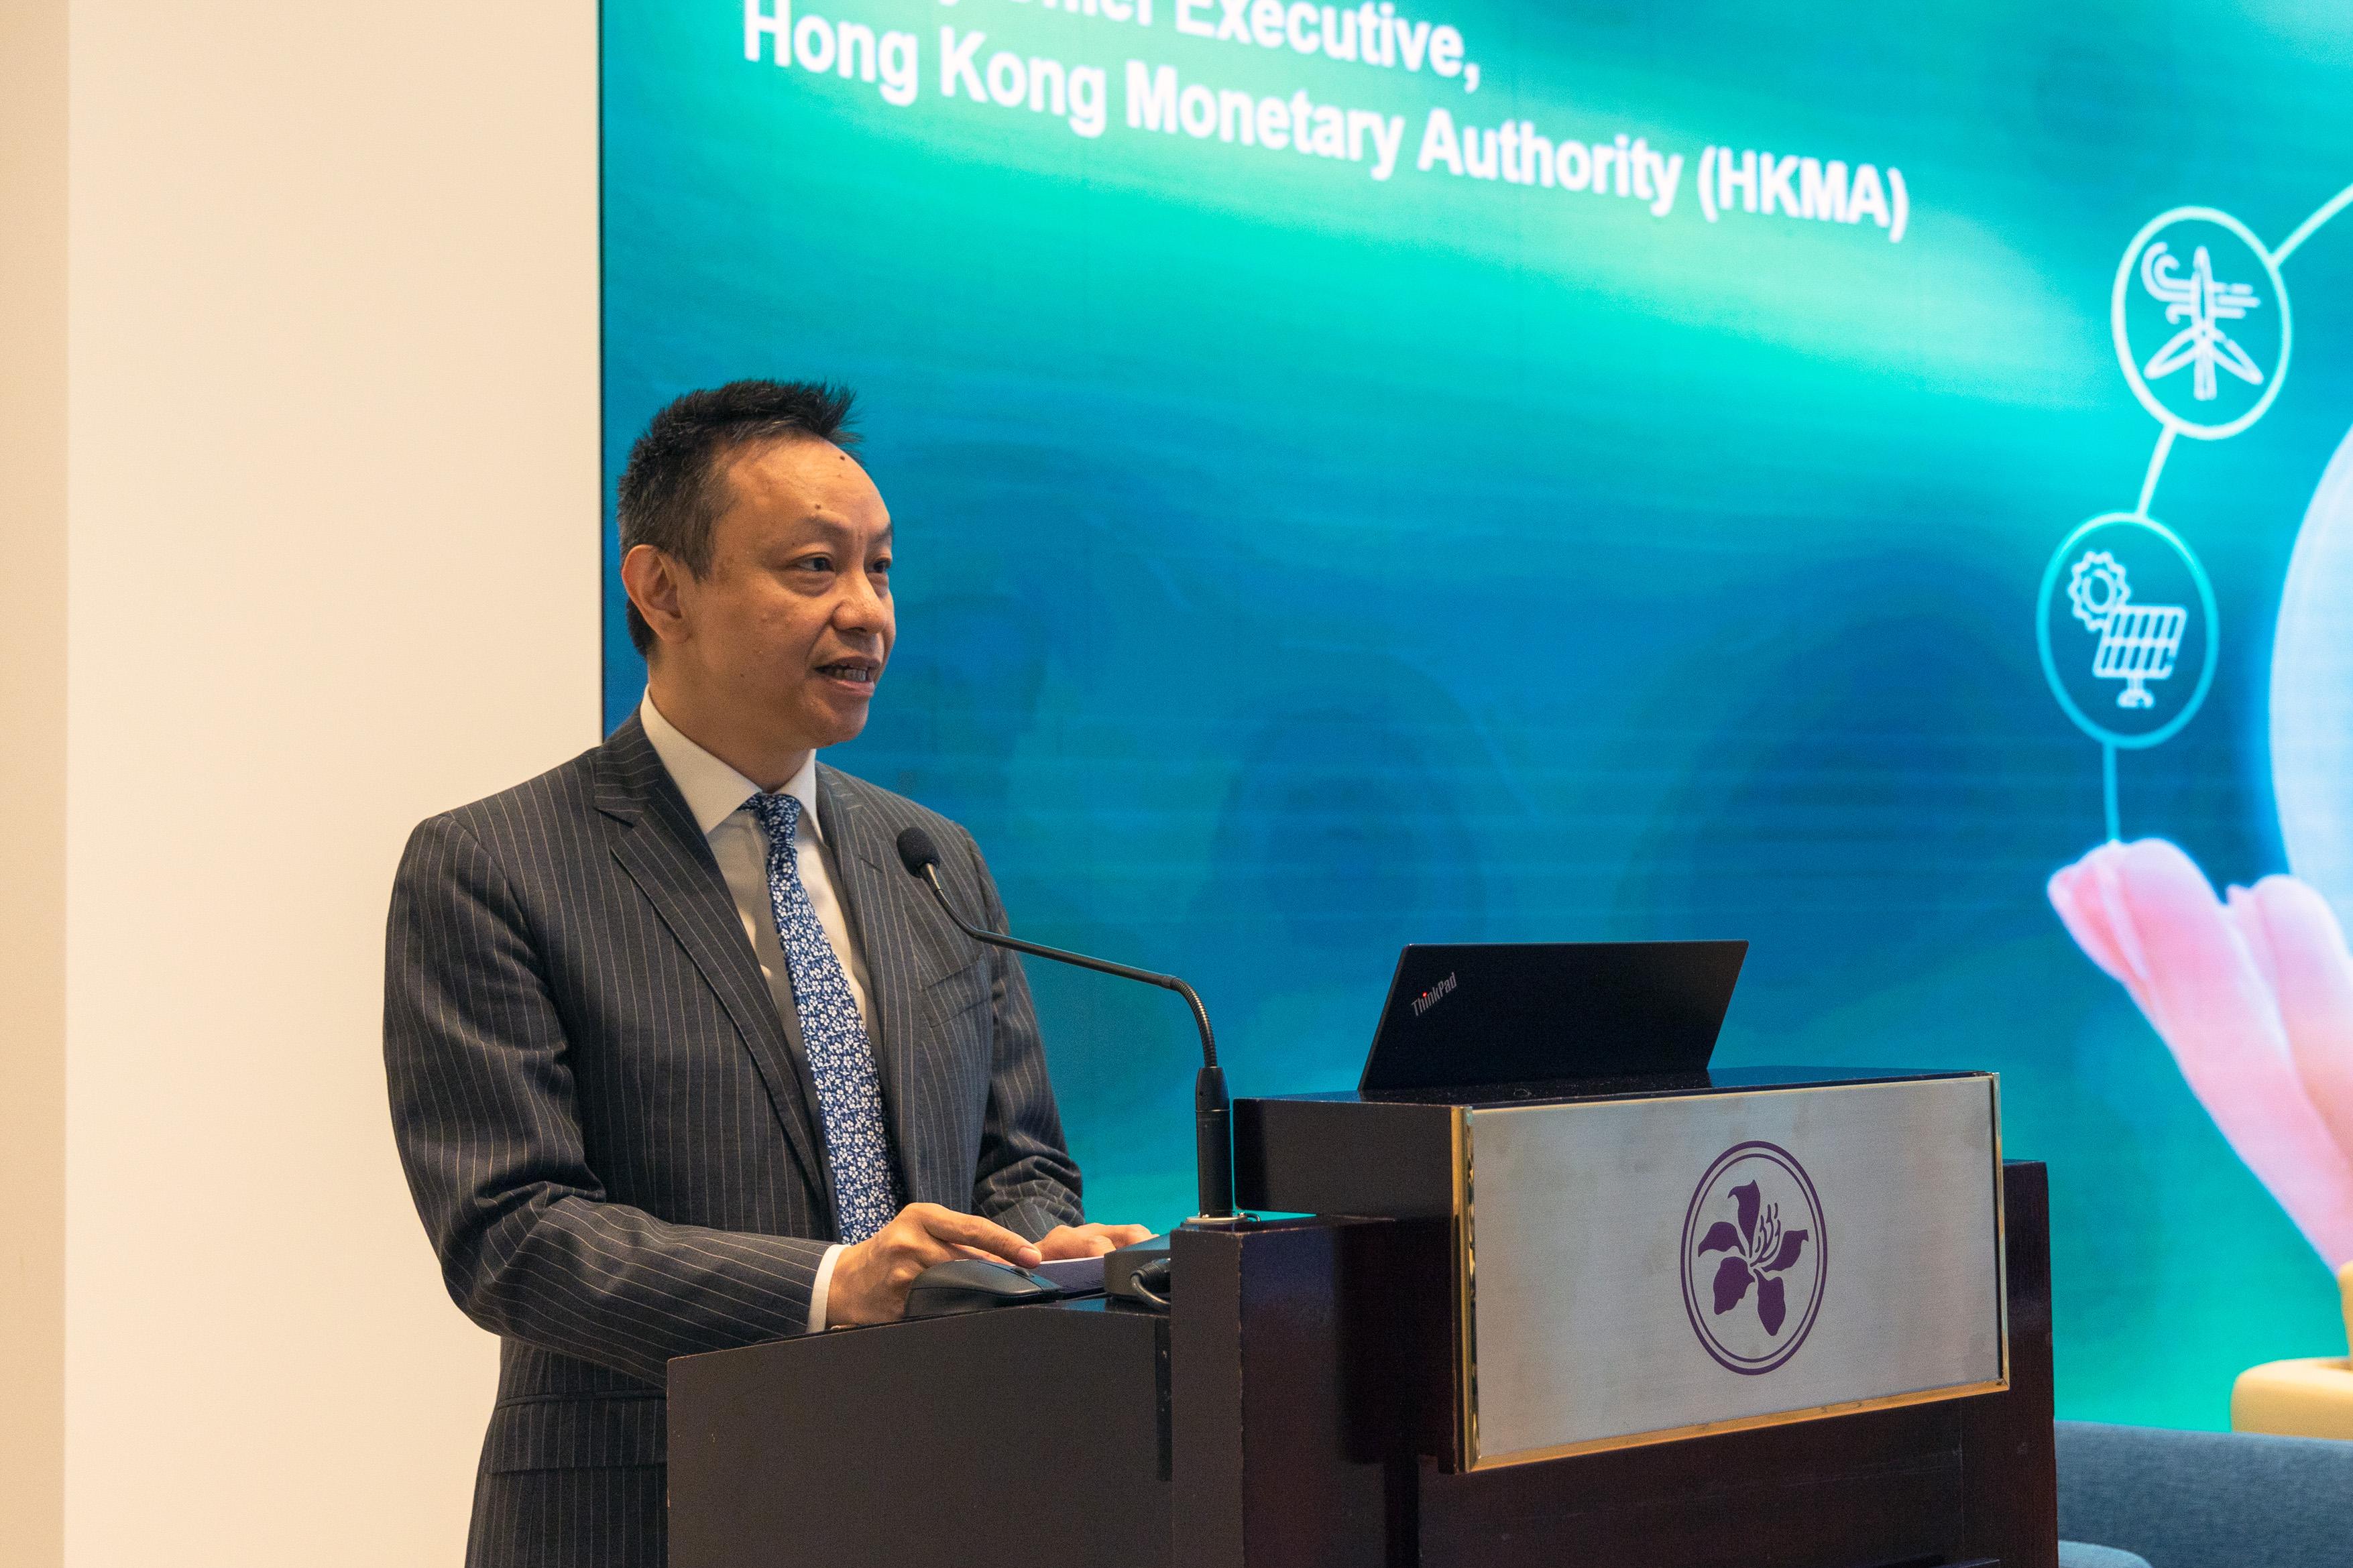 The Green and Sustainable Finance Cross-Agency Steering Group and CDP co-organised a joint seminar on sustainability reporting today (March 13). Photo shows Deputy Chief Executive of the Hong Kong Monetary Authority Mr Darryl Chan, giving welcome remarks at the seminar.